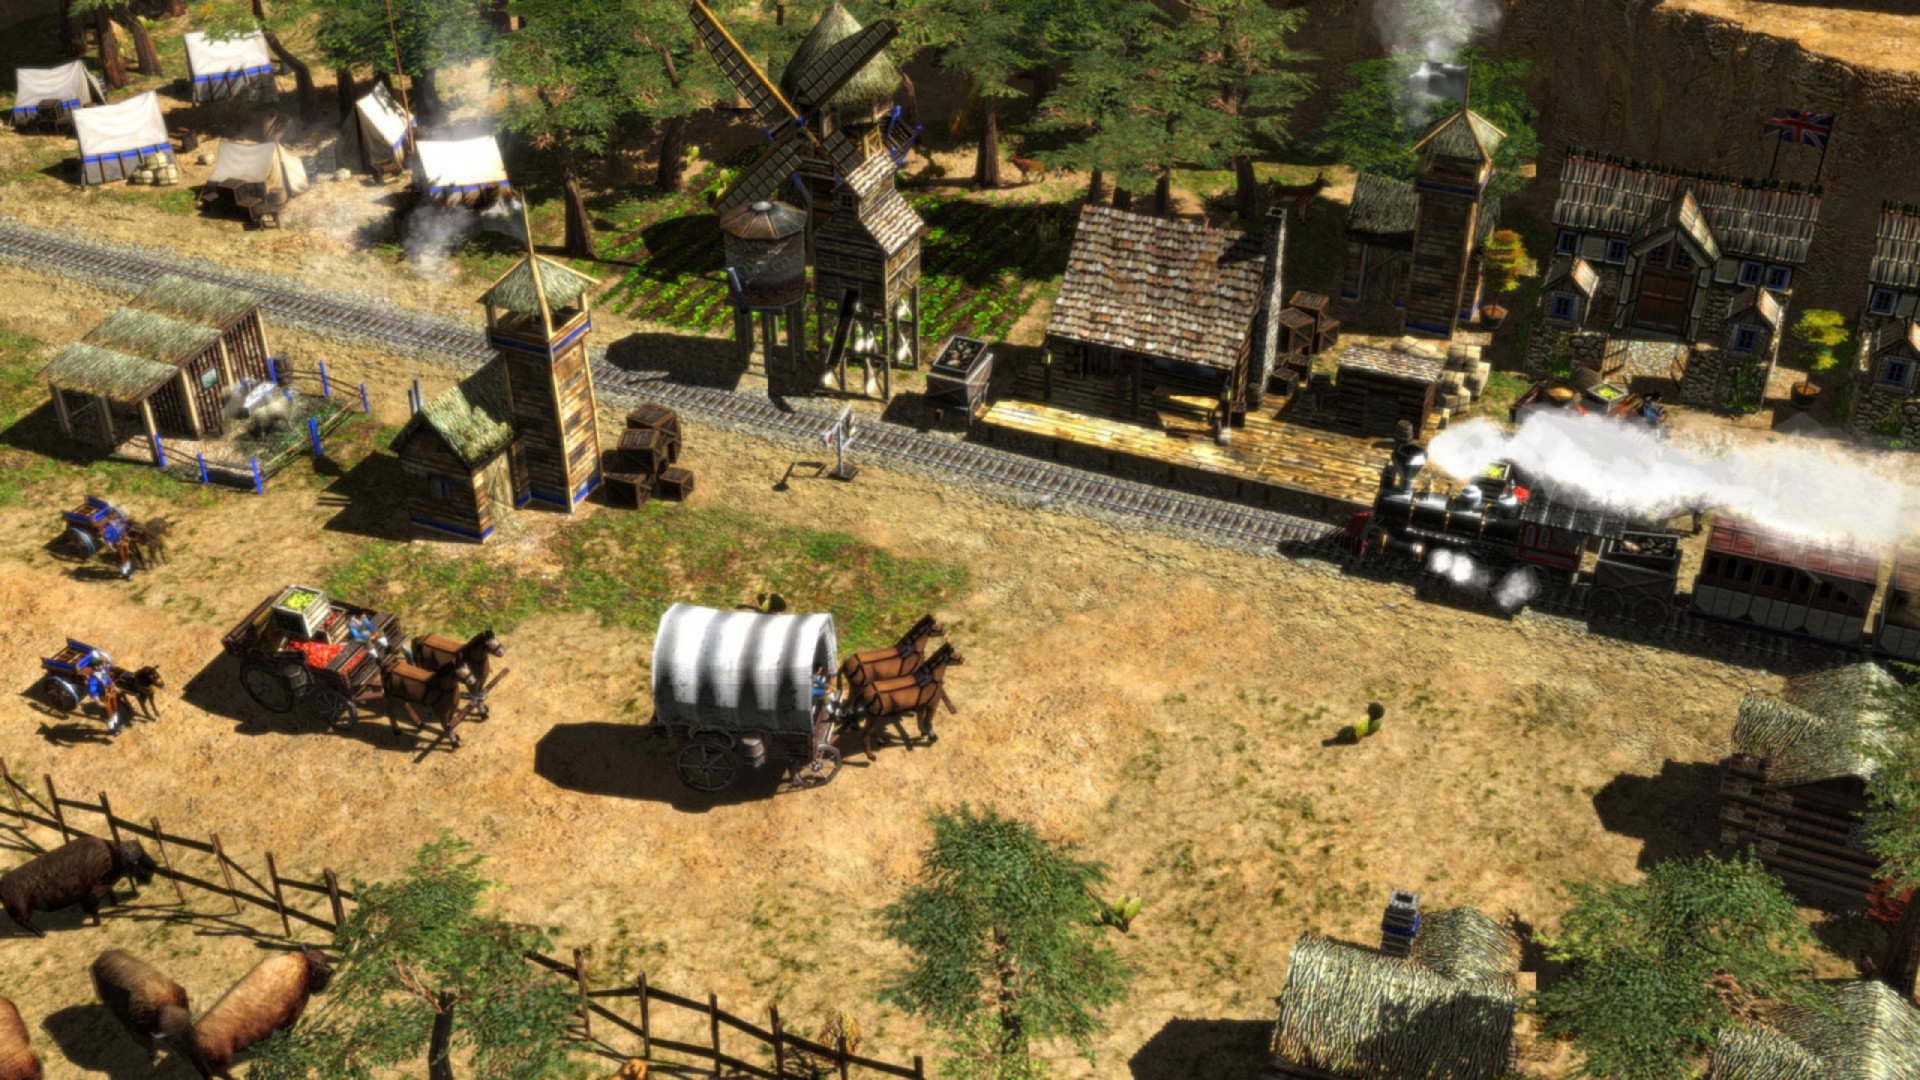 Age of Empires  III (2007) Free Download